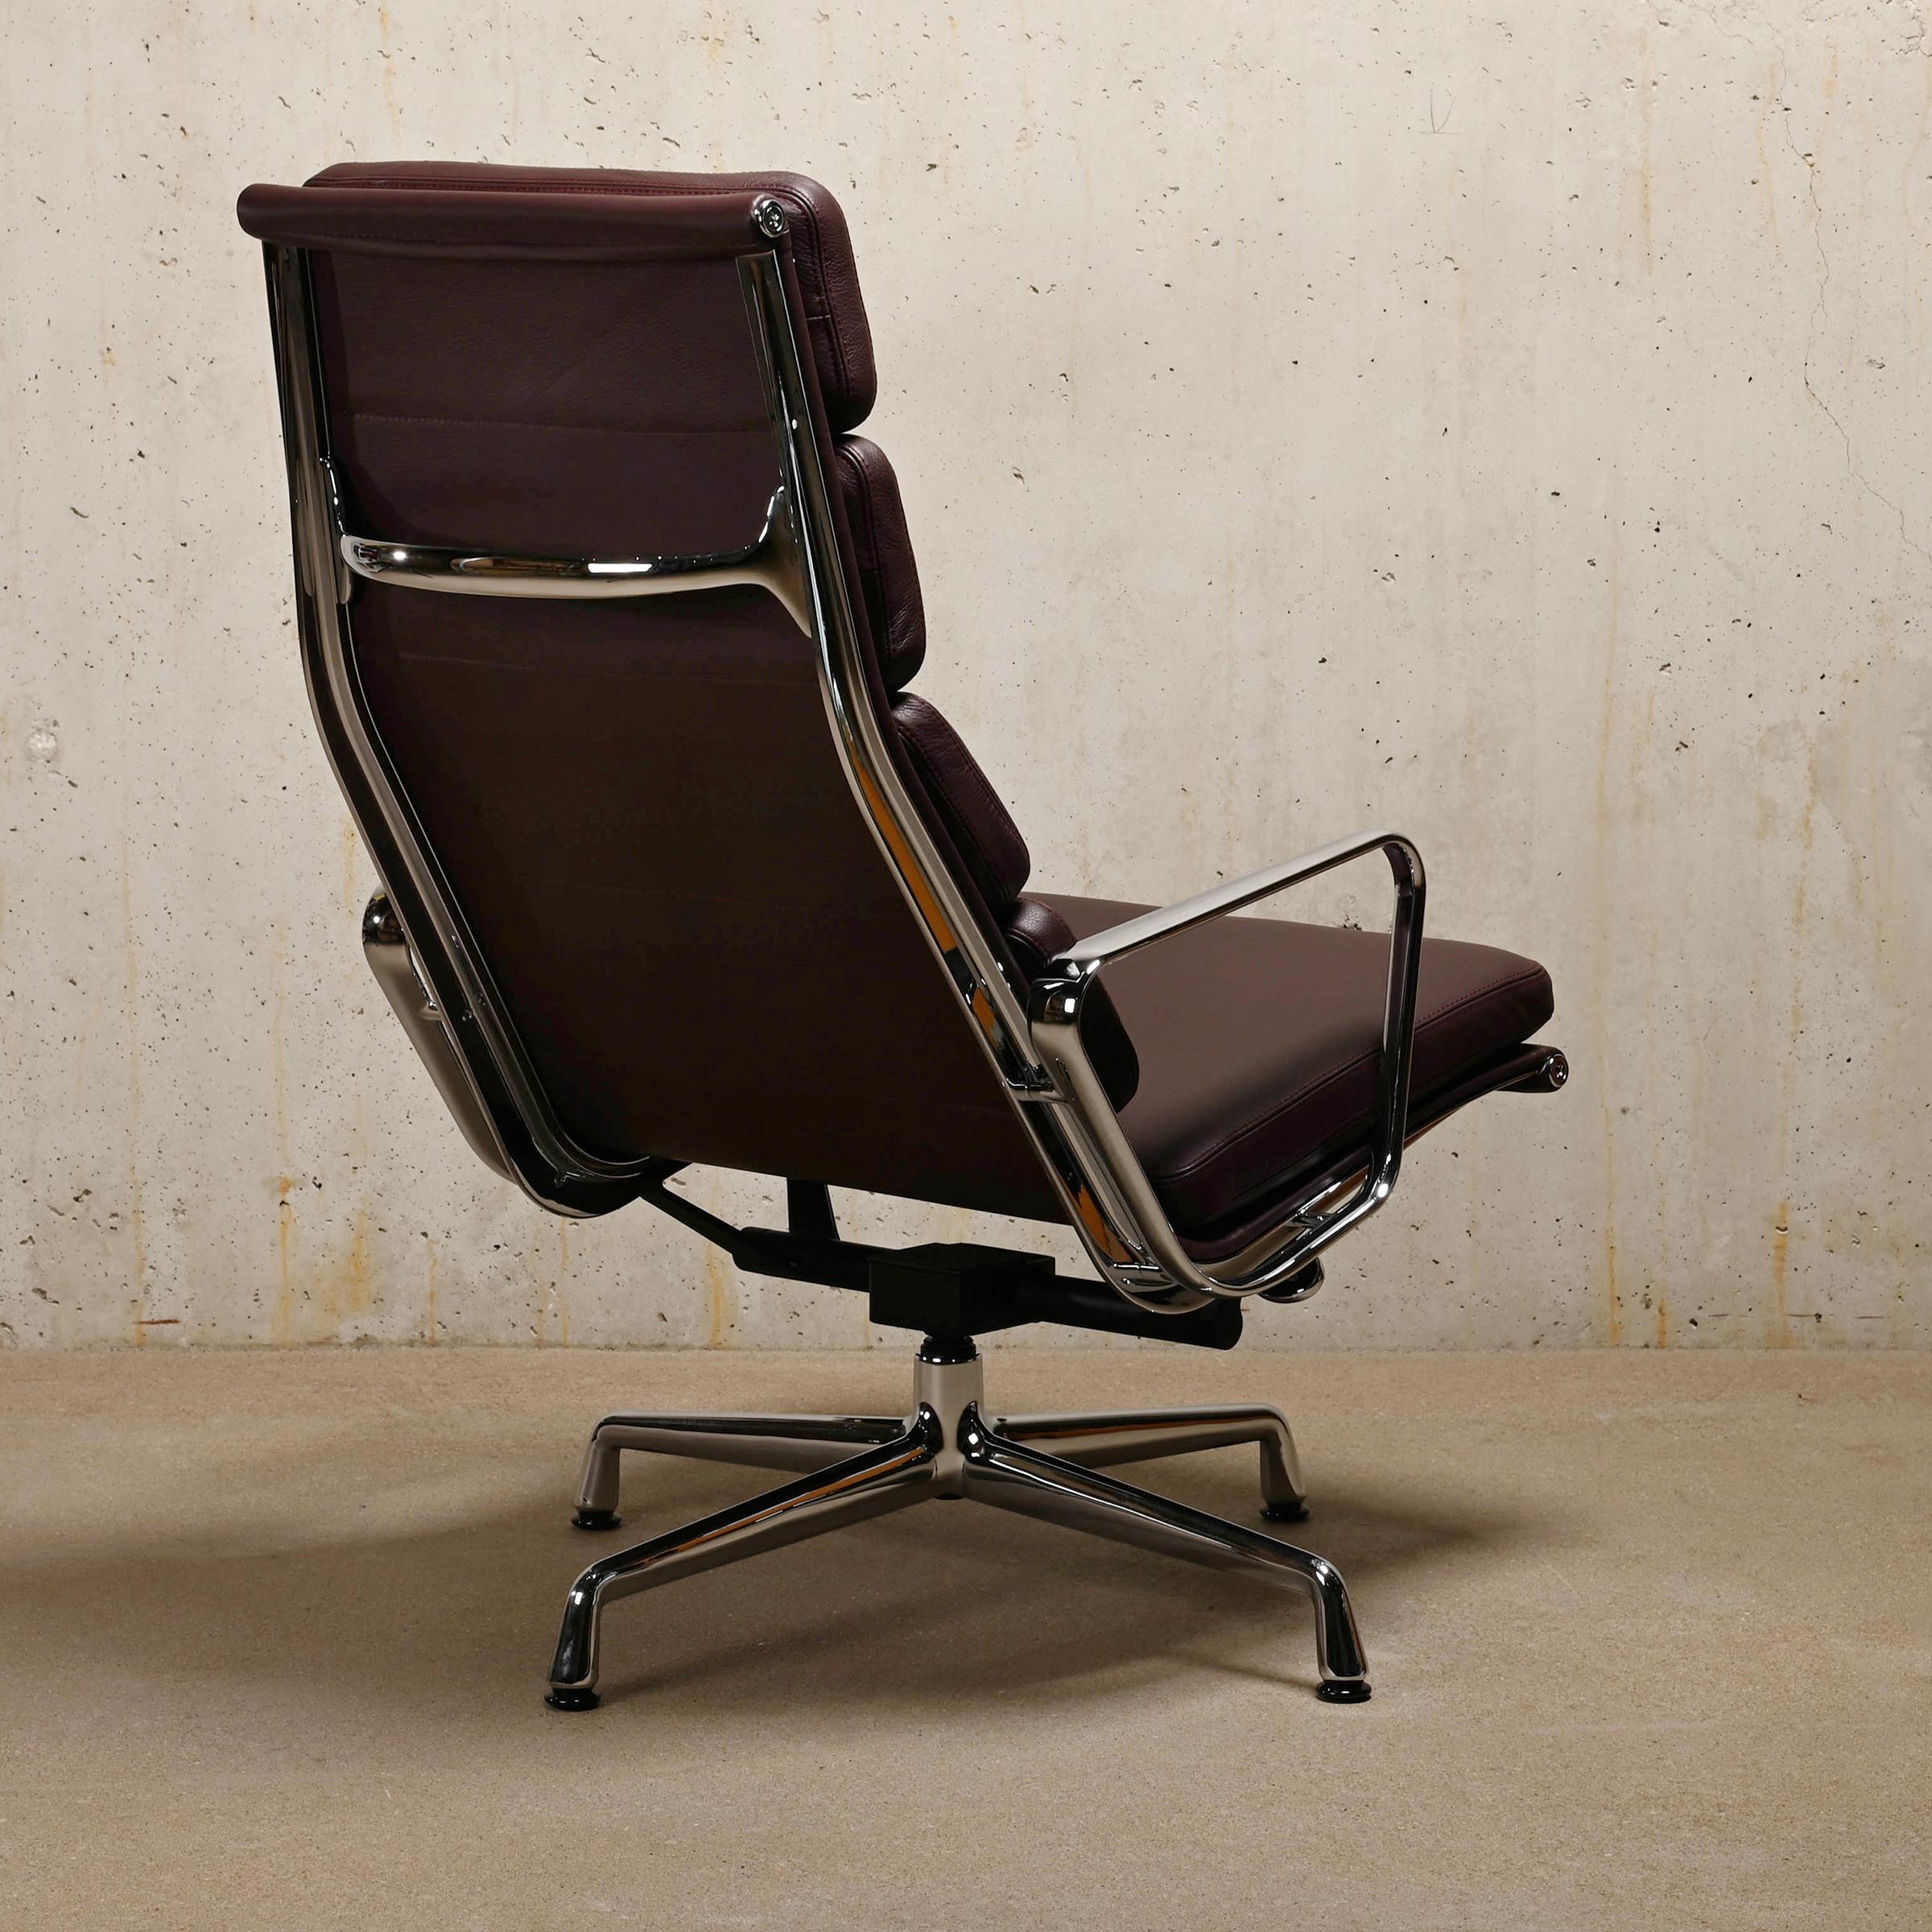 Charles & Ray Eames EA222 Lounge Chair and EA223 Ottoman in Plume Leather, Vitra In Excellent Condition For Sale In Amsterdam, NL